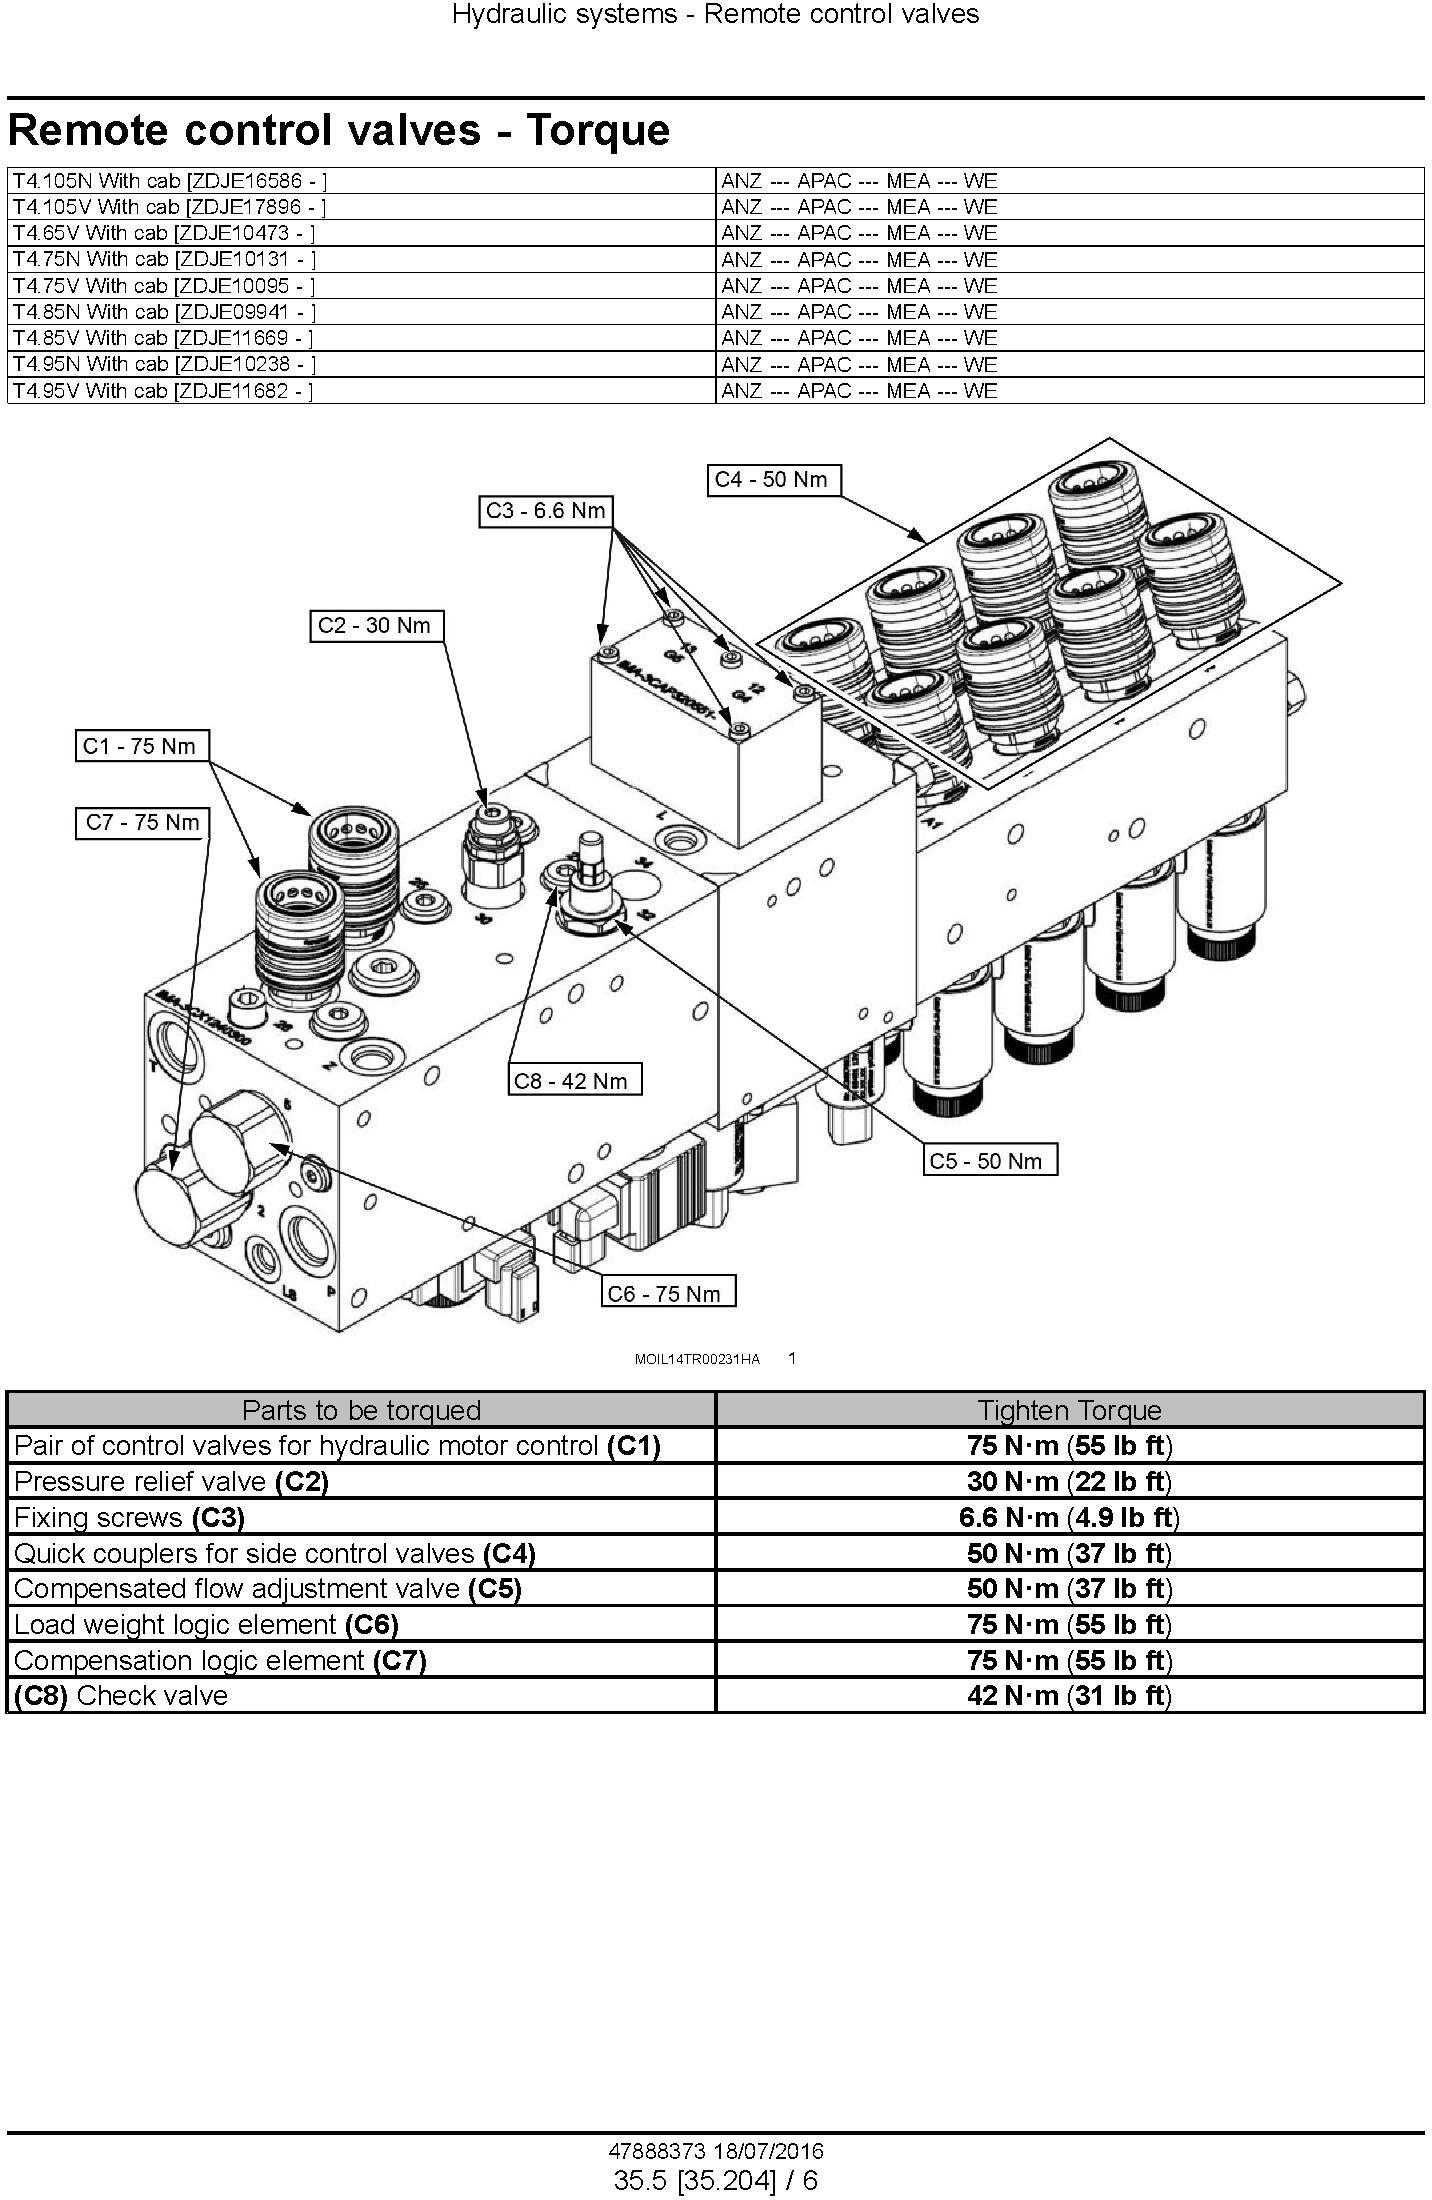 New Holland T4.75N T4.85N T4.95N T4.105N; T4.65V T4.75V T4.85V T4.95V T4.105V Tractor Service Manual - 3